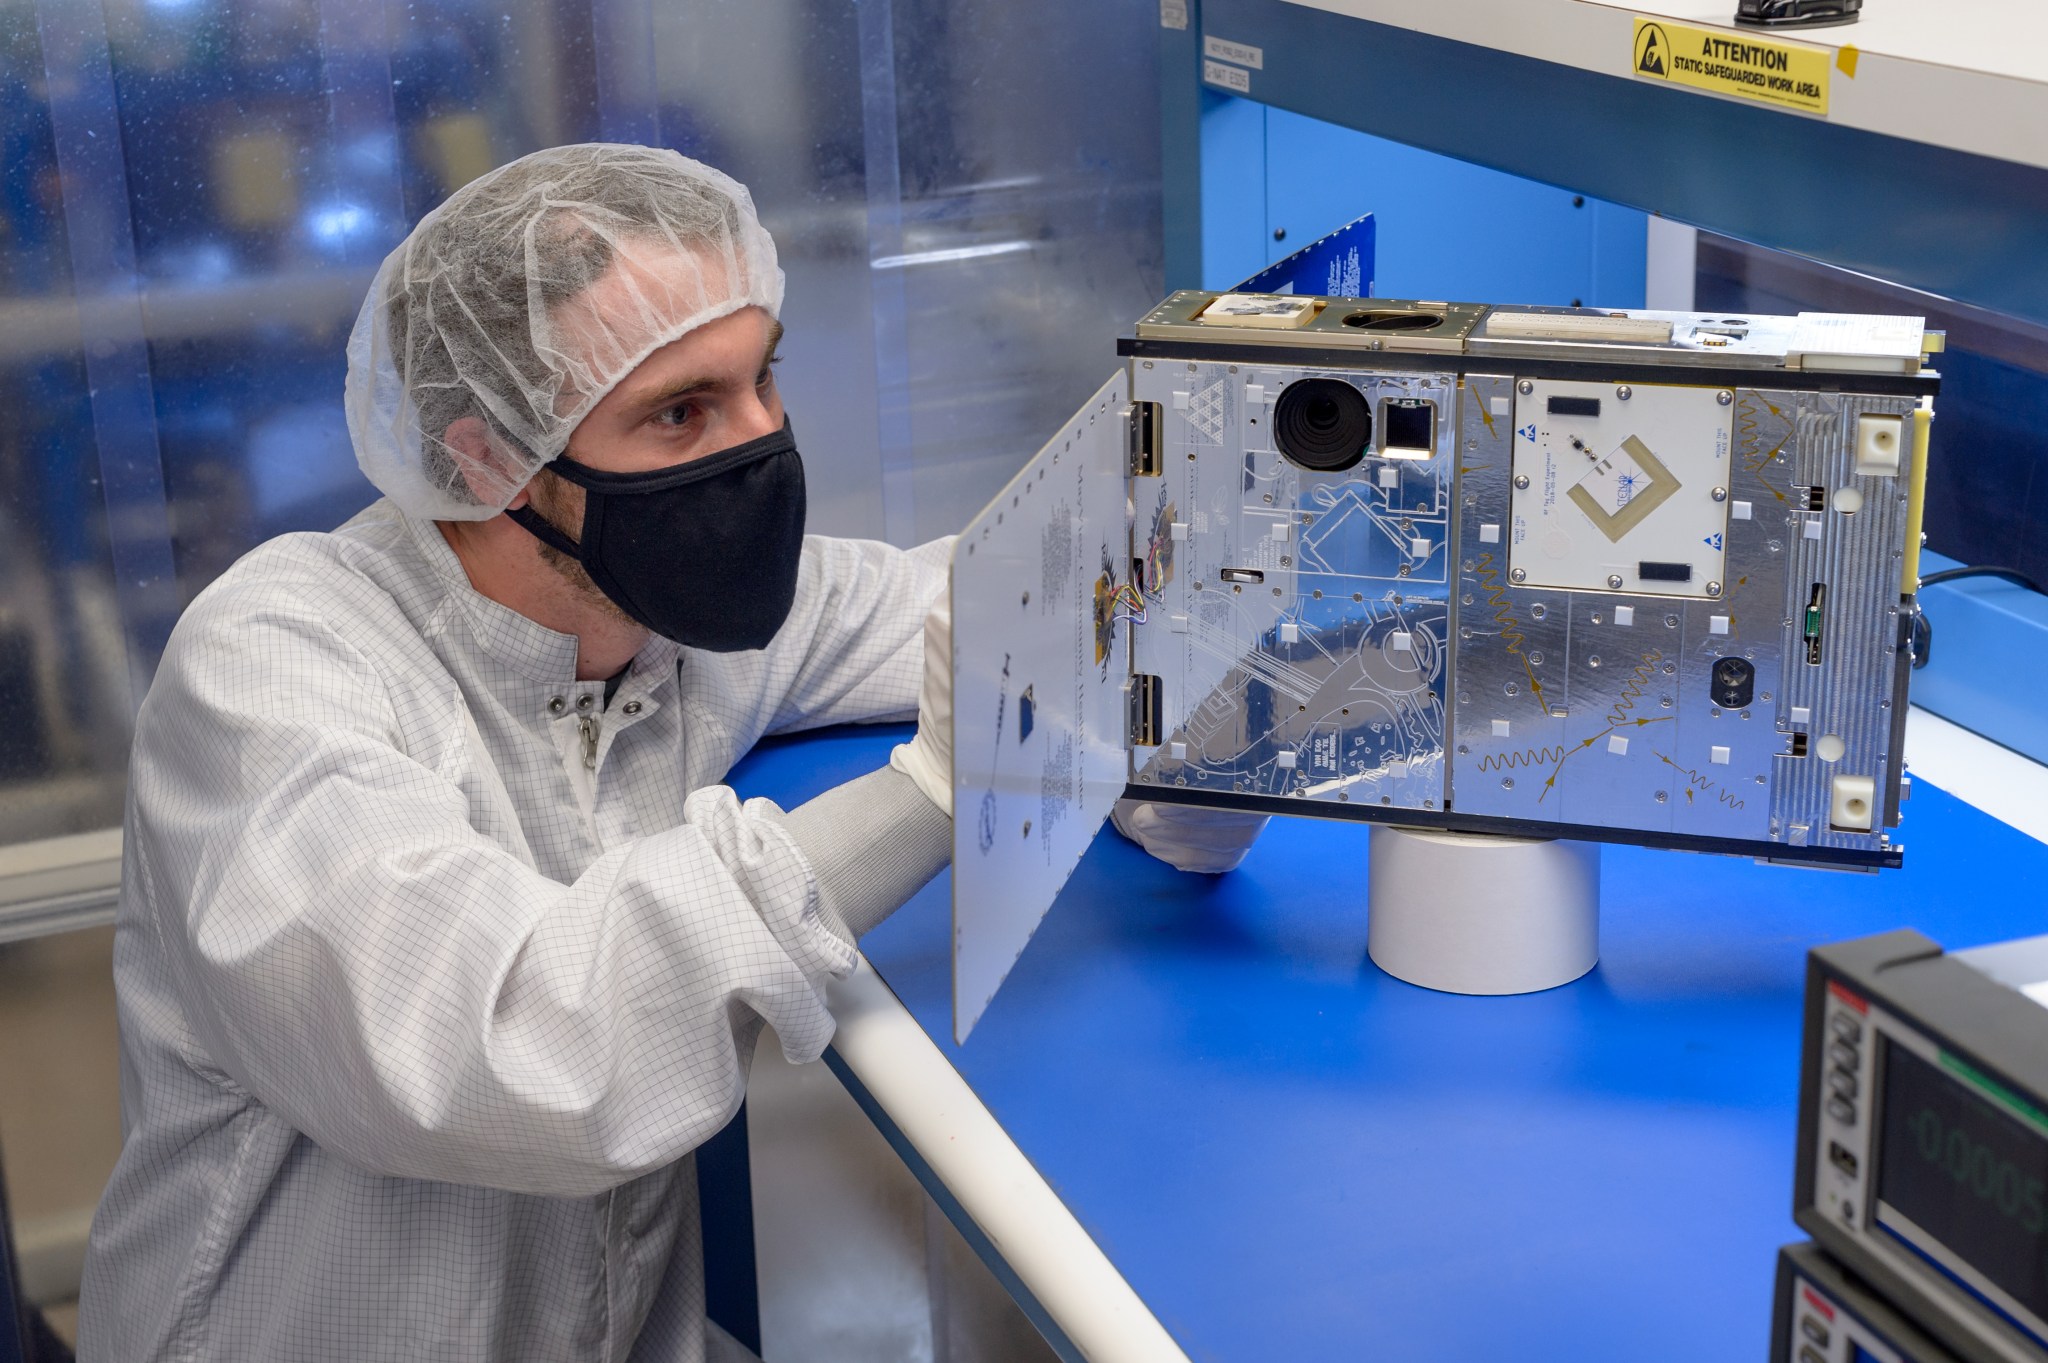 Connor Nelson, PACE flight software lead, performs a visual inspection of the PACE-1 spacecraft.